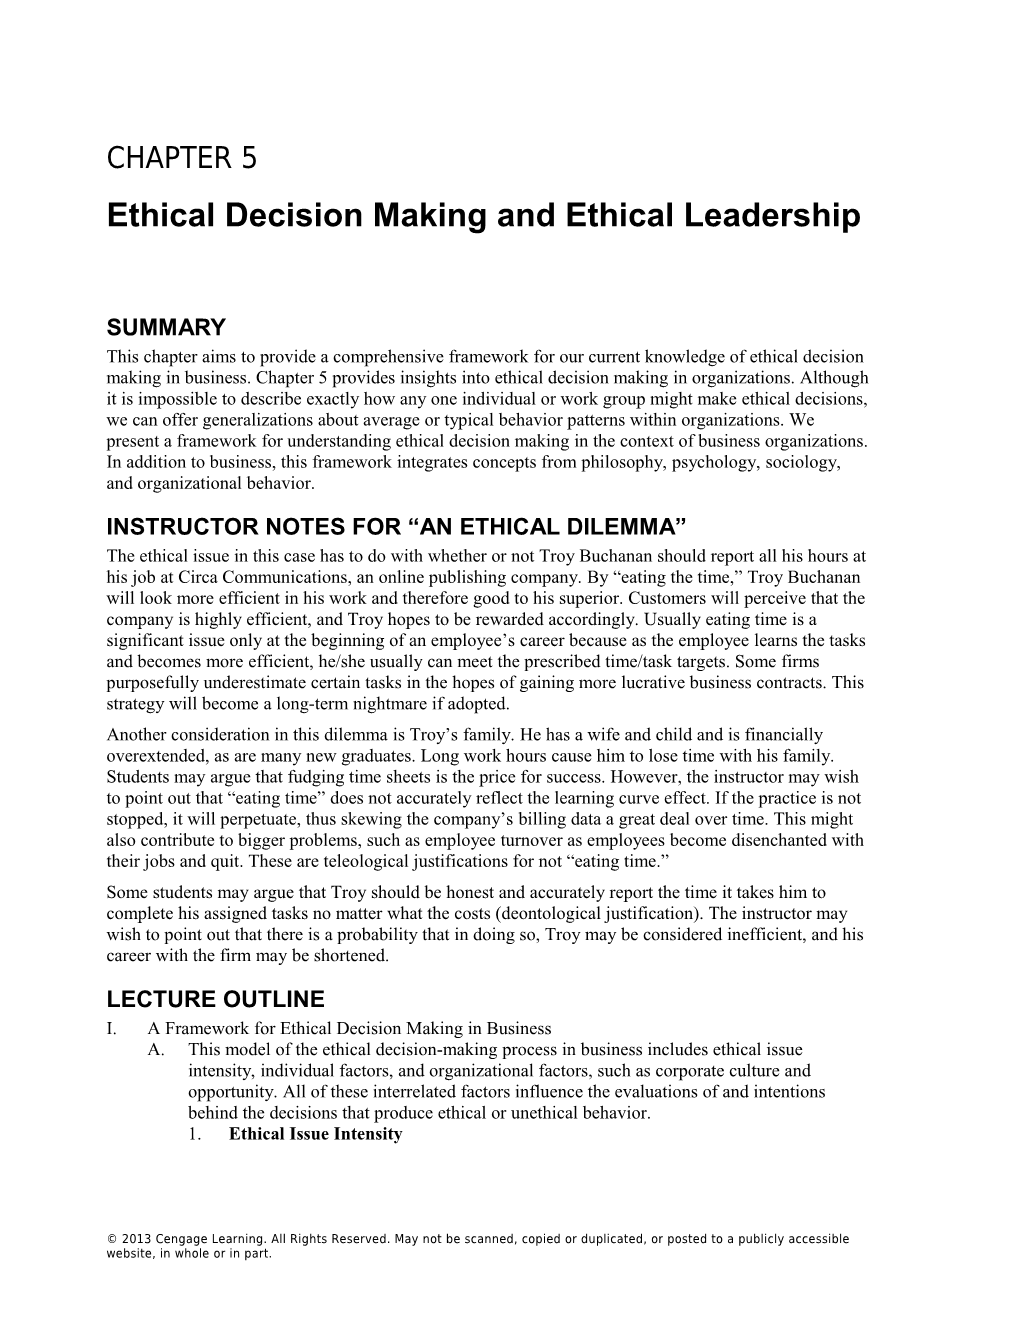 Chapter 5: Ethical Decision Making and Ethical Leadership1